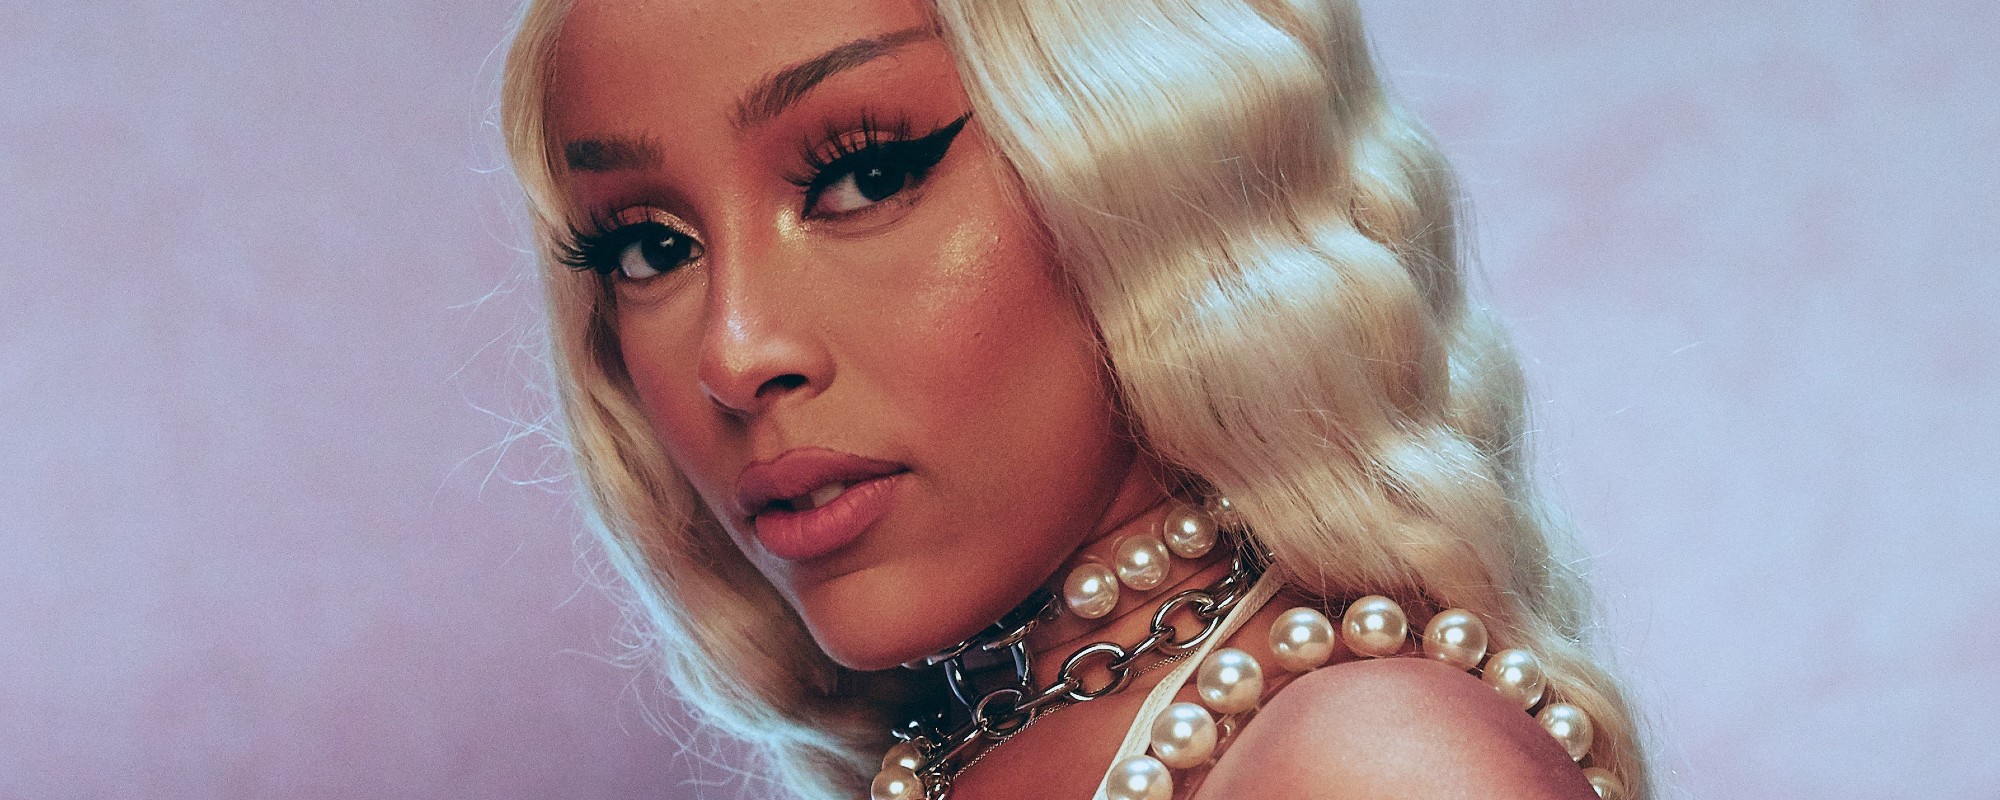 Doja Cat Launches Her' Era With SZAFeaturing "Kiss Me More